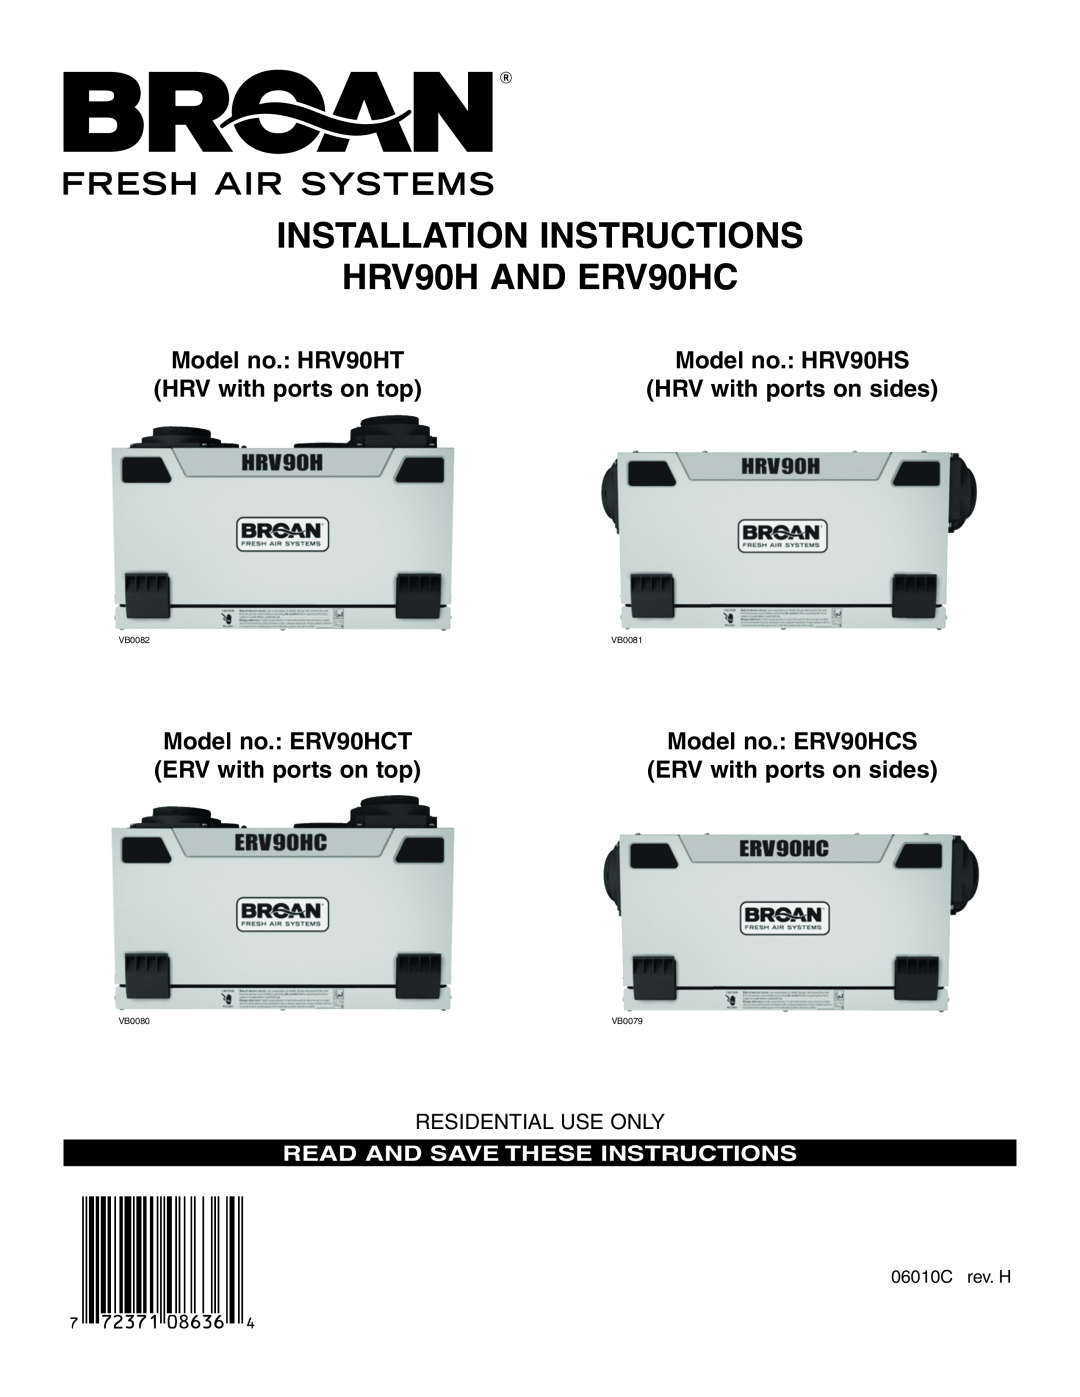 Broan ERV90HCT installation instructions INSTALLATION INSTRUCTIONS HRV90H AND ERV90HC, HRV with ports on top 